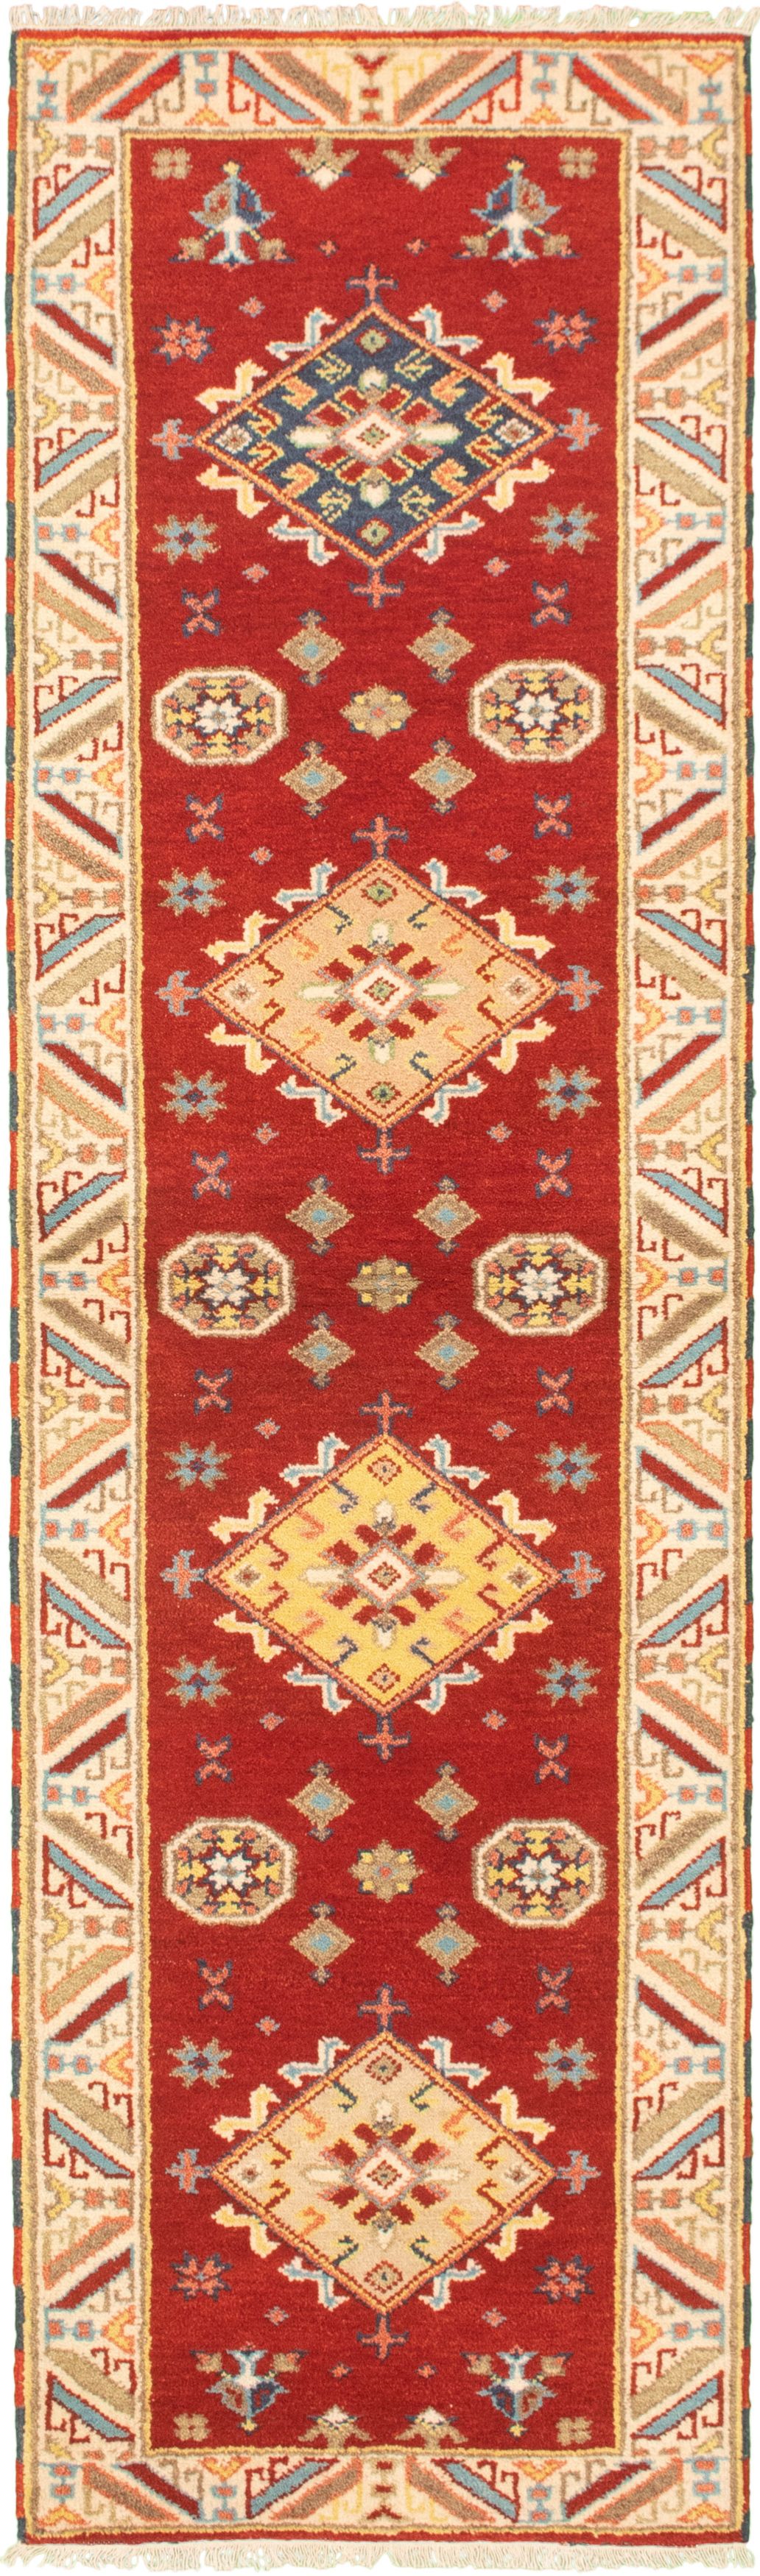 Hand-knotted Royal Kazak Red Wool Rug 2'9" x 9'10" (23) Size: 2'9" x 9'10"  